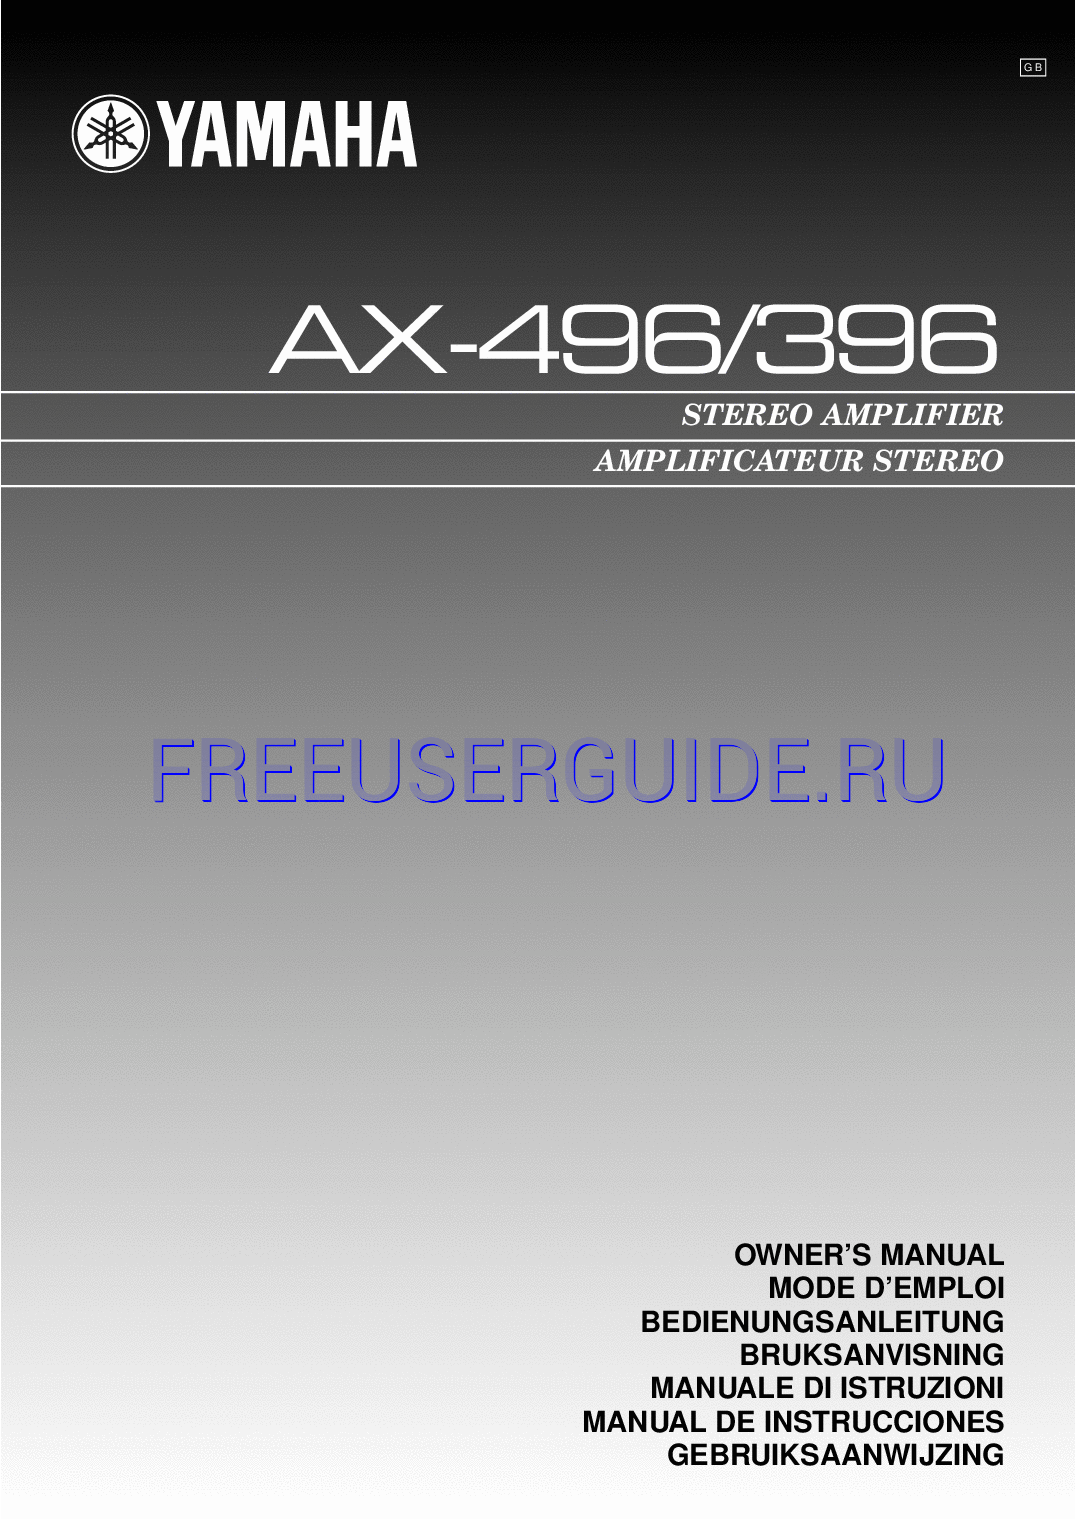 Read online Owner's Manual for Yamaha AX-496 (Page 1)